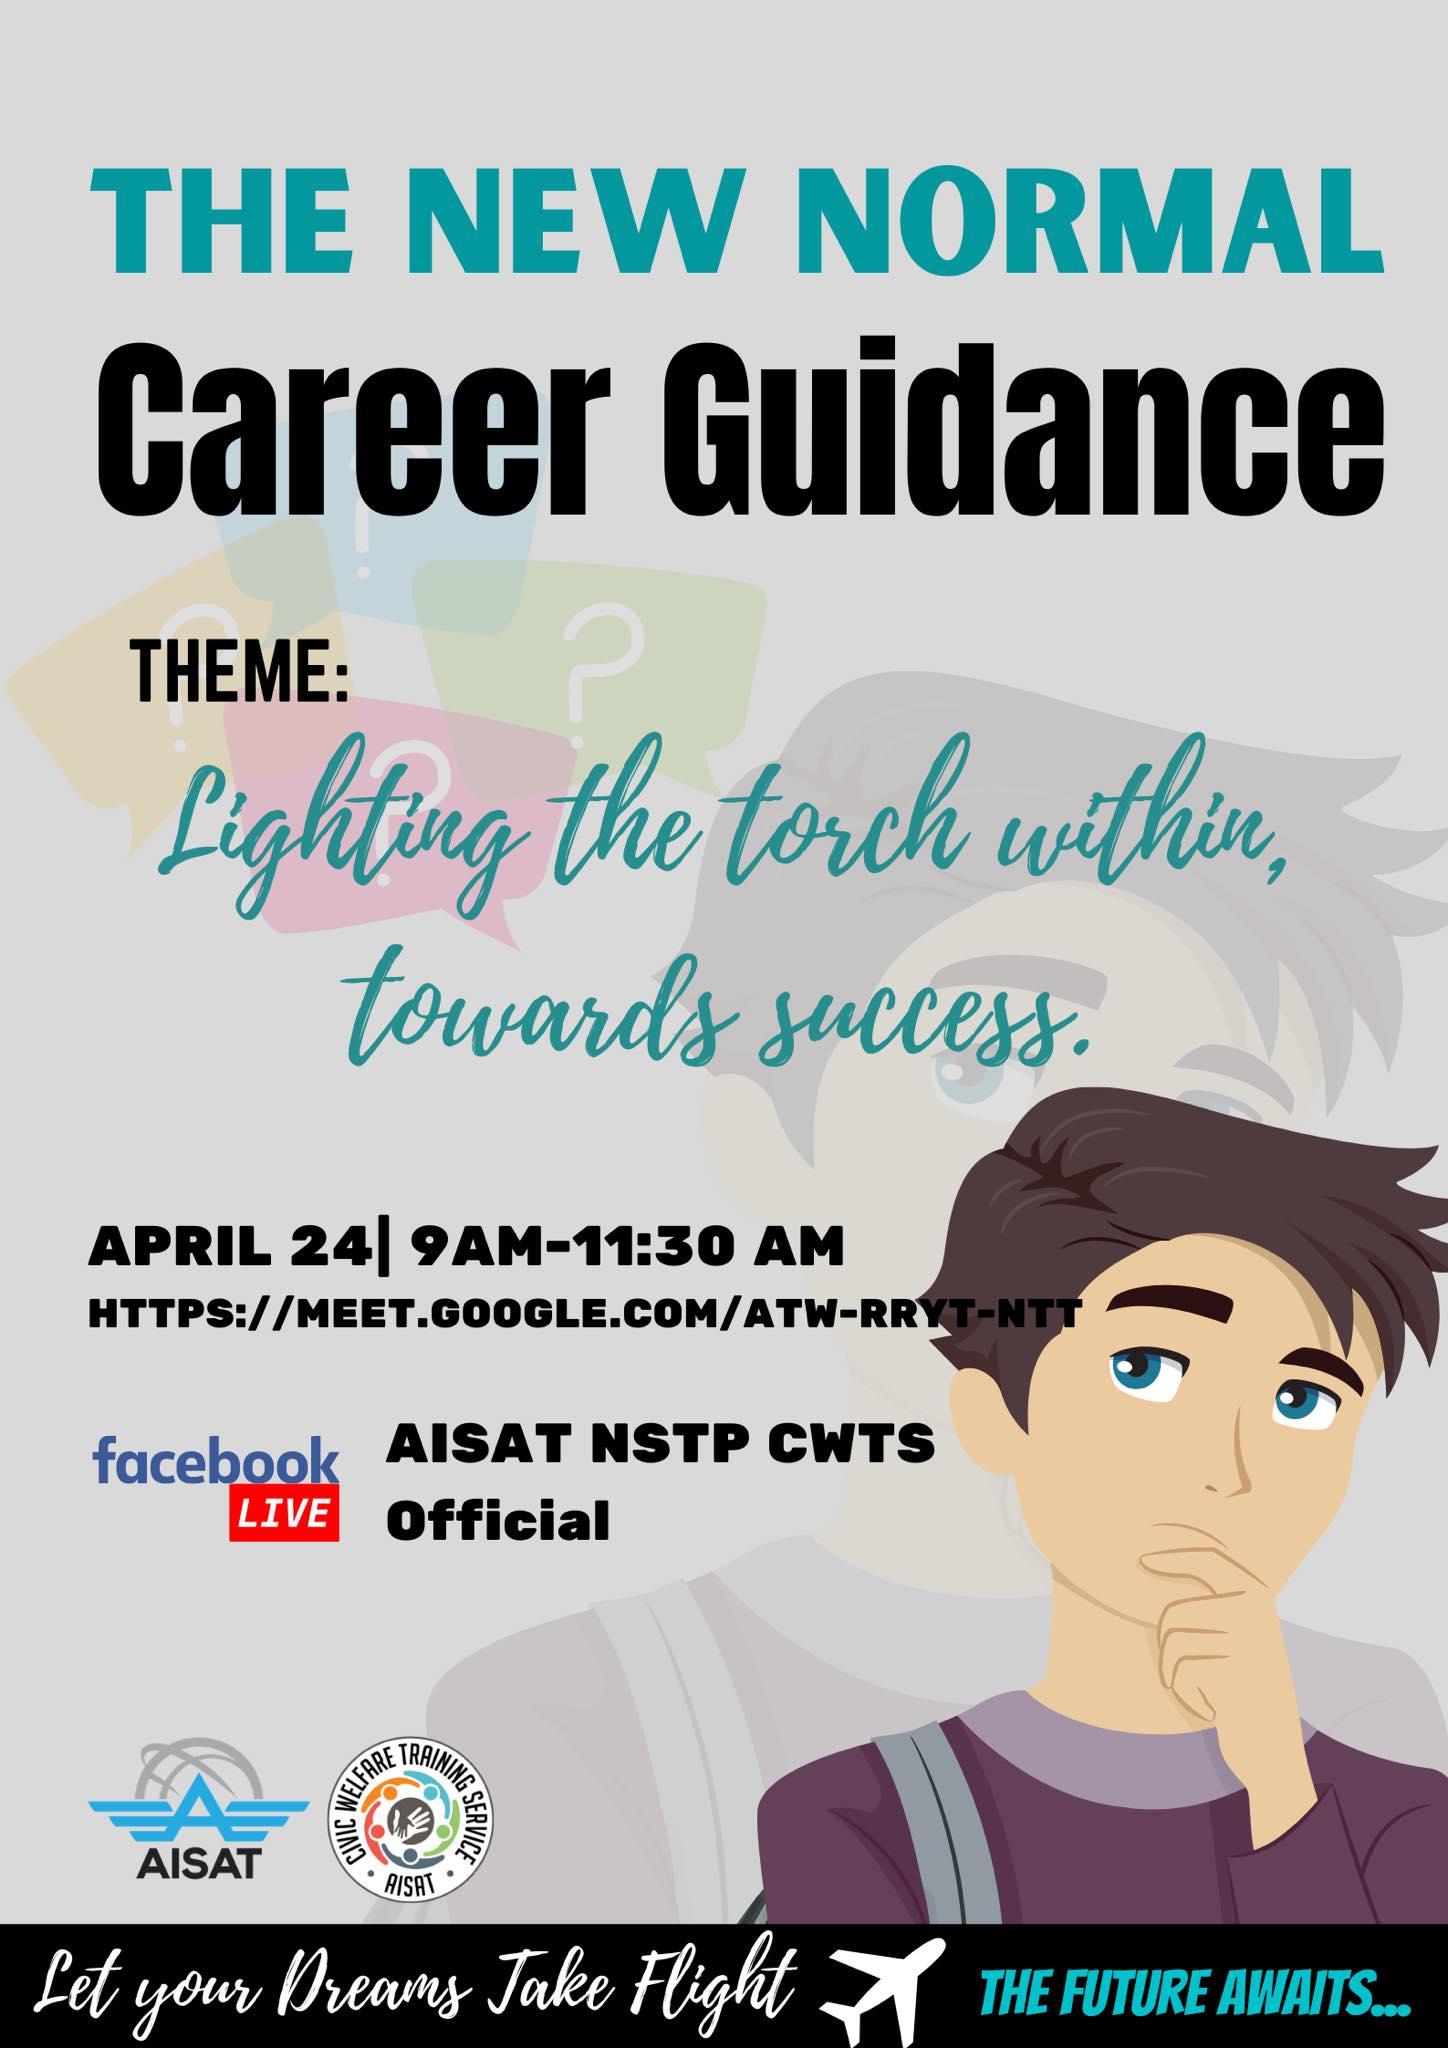 NSTP Special: “THE NEW NORMAL CAREER GUIDANCE”